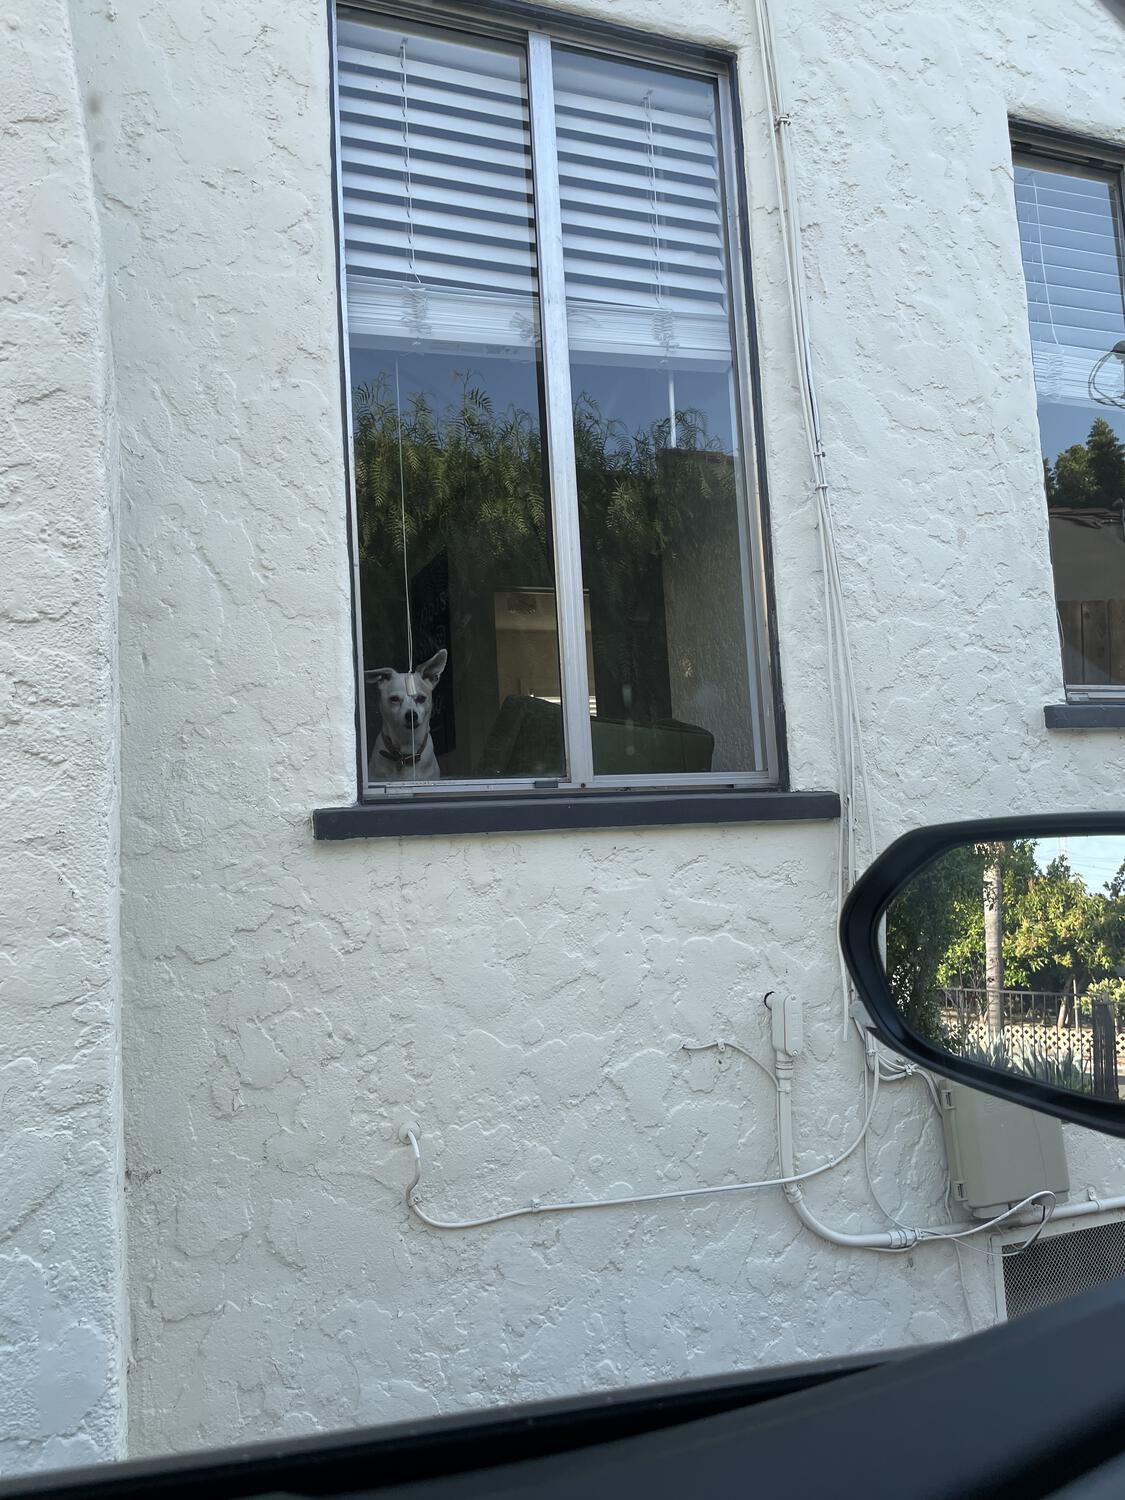 Travis the dog looking at the camera from behind a window. The photographer is sitting in a car, Travis seems to feel betrayed